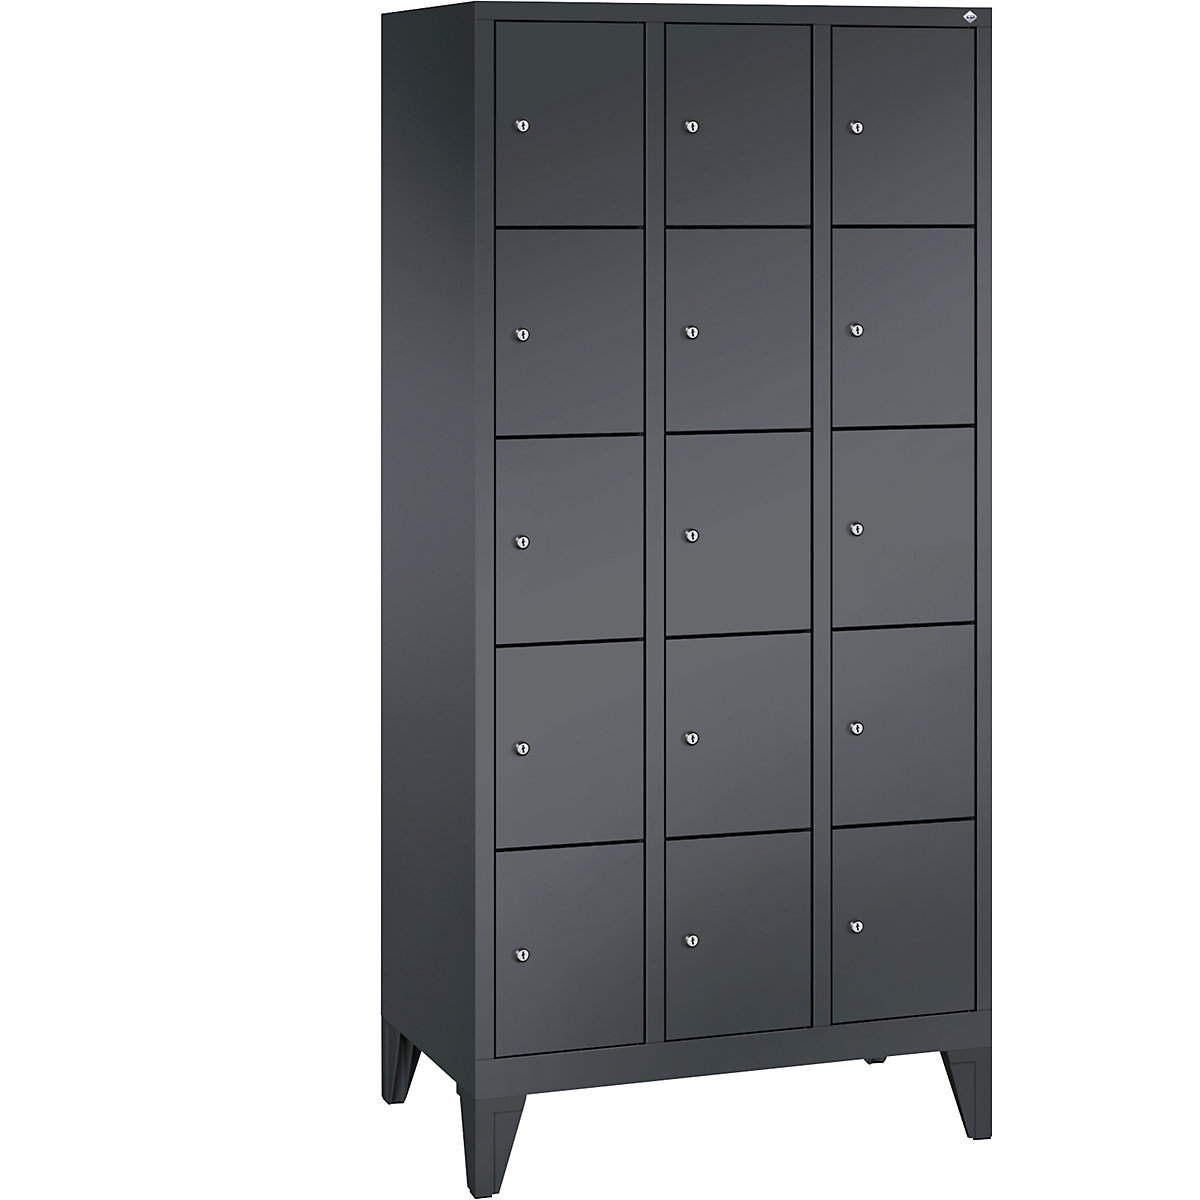 CLASSIC locker unit with feet – C+P, 3 compartments, 5 shelf compartments each, compartment width 300 mm, black grey-5